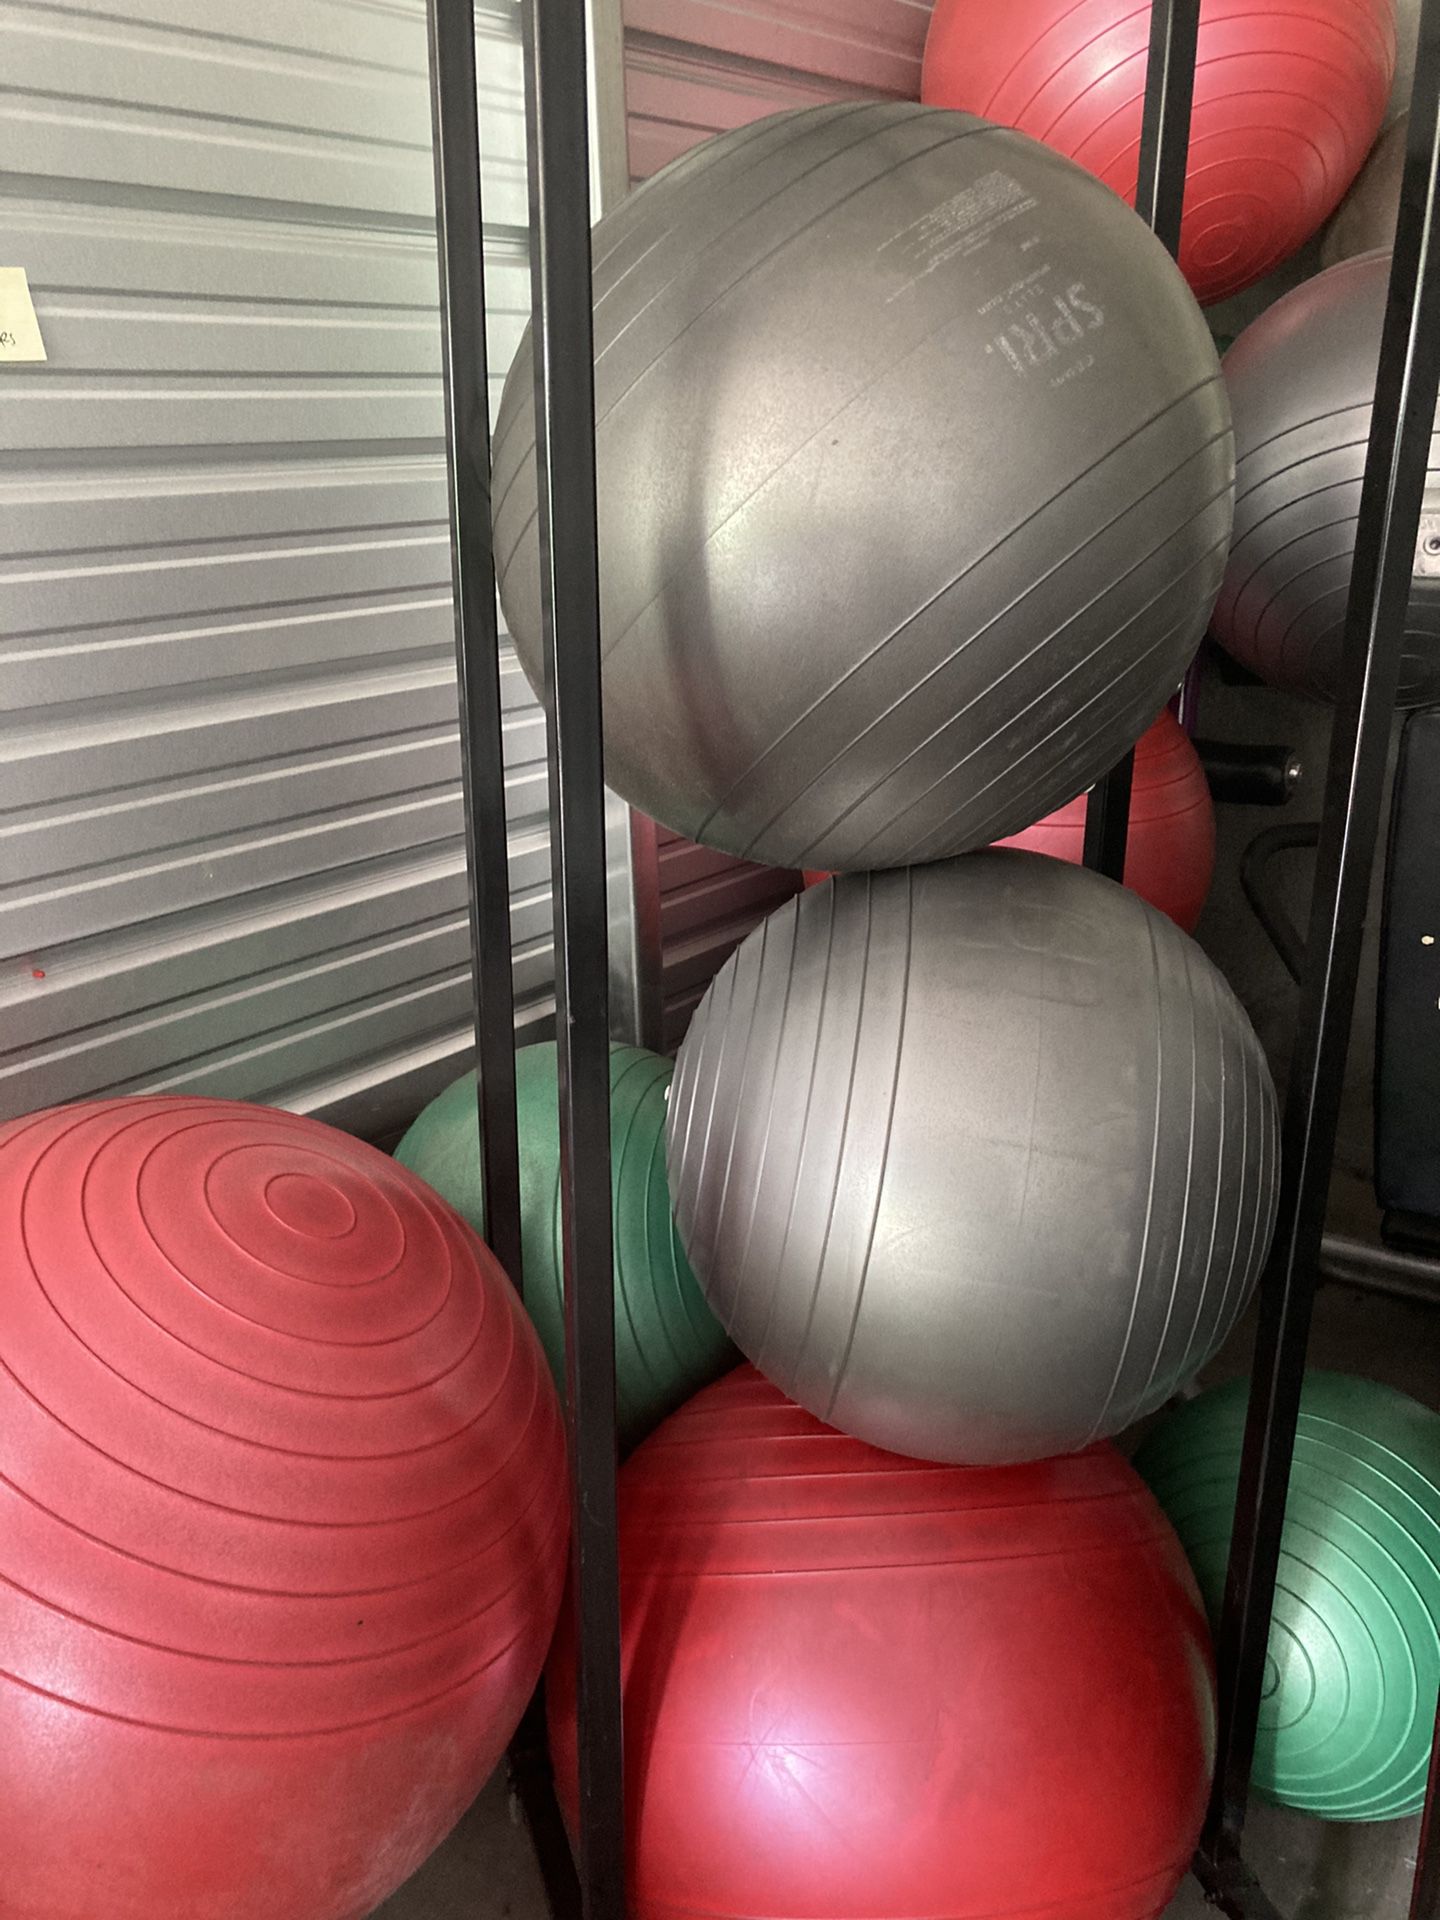 Yoga, workout and physical balls - Gym Equipment